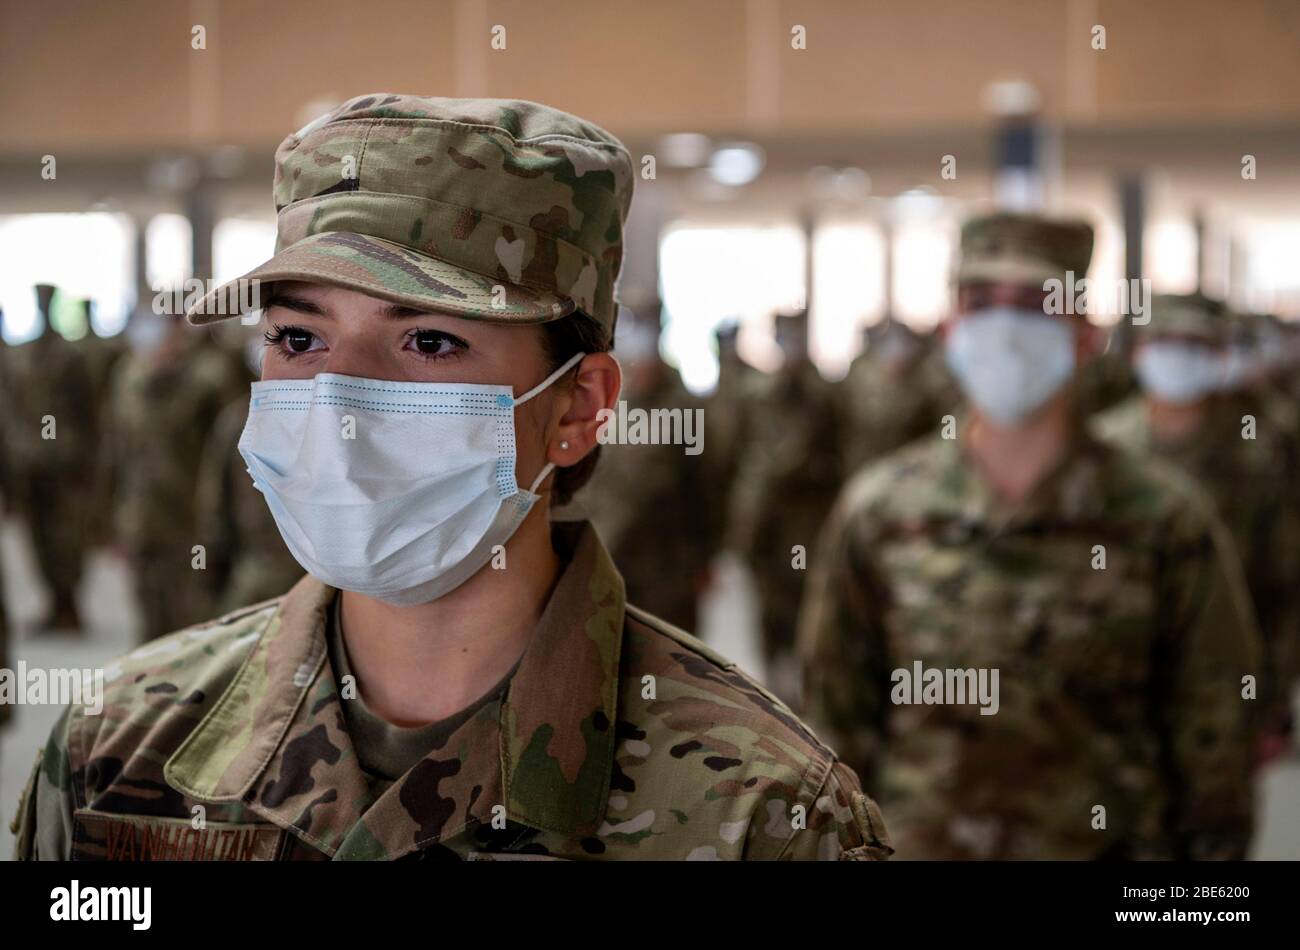 U.S. Air Force airmen wearing face masks and practicing social distancing during basic military graduation at the 321st Training Squadron Training Complex on Joint Base San Antonio-Lackland Apr. 9, 2020 in San Antonio, Texas. Due to the COVID-19, coronavirus pandemic the ceremony was closed to the public and family members. Stock Photo